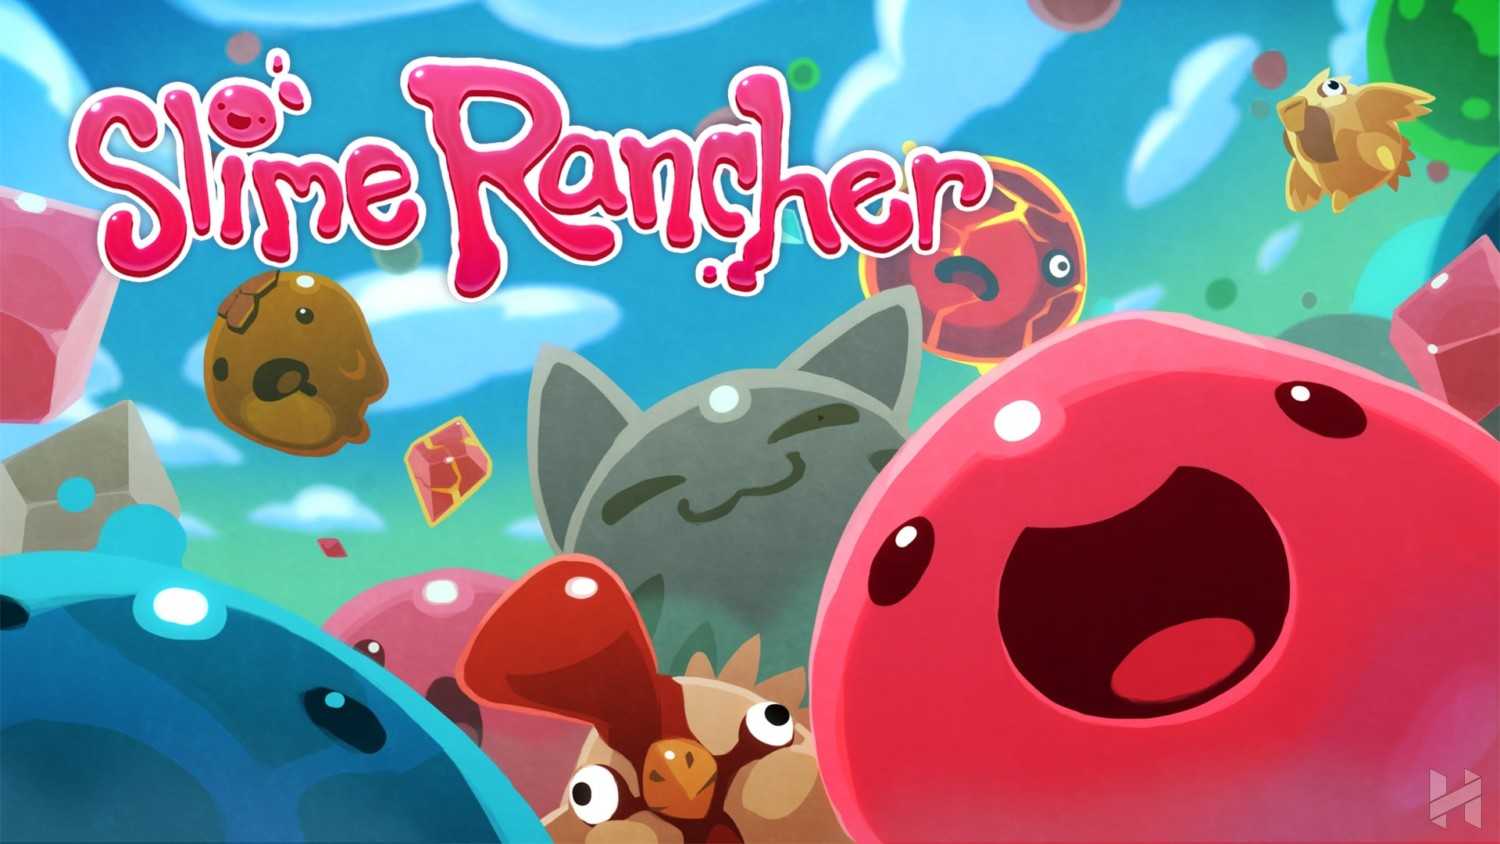 Slime-Rancher-analisis-ps4